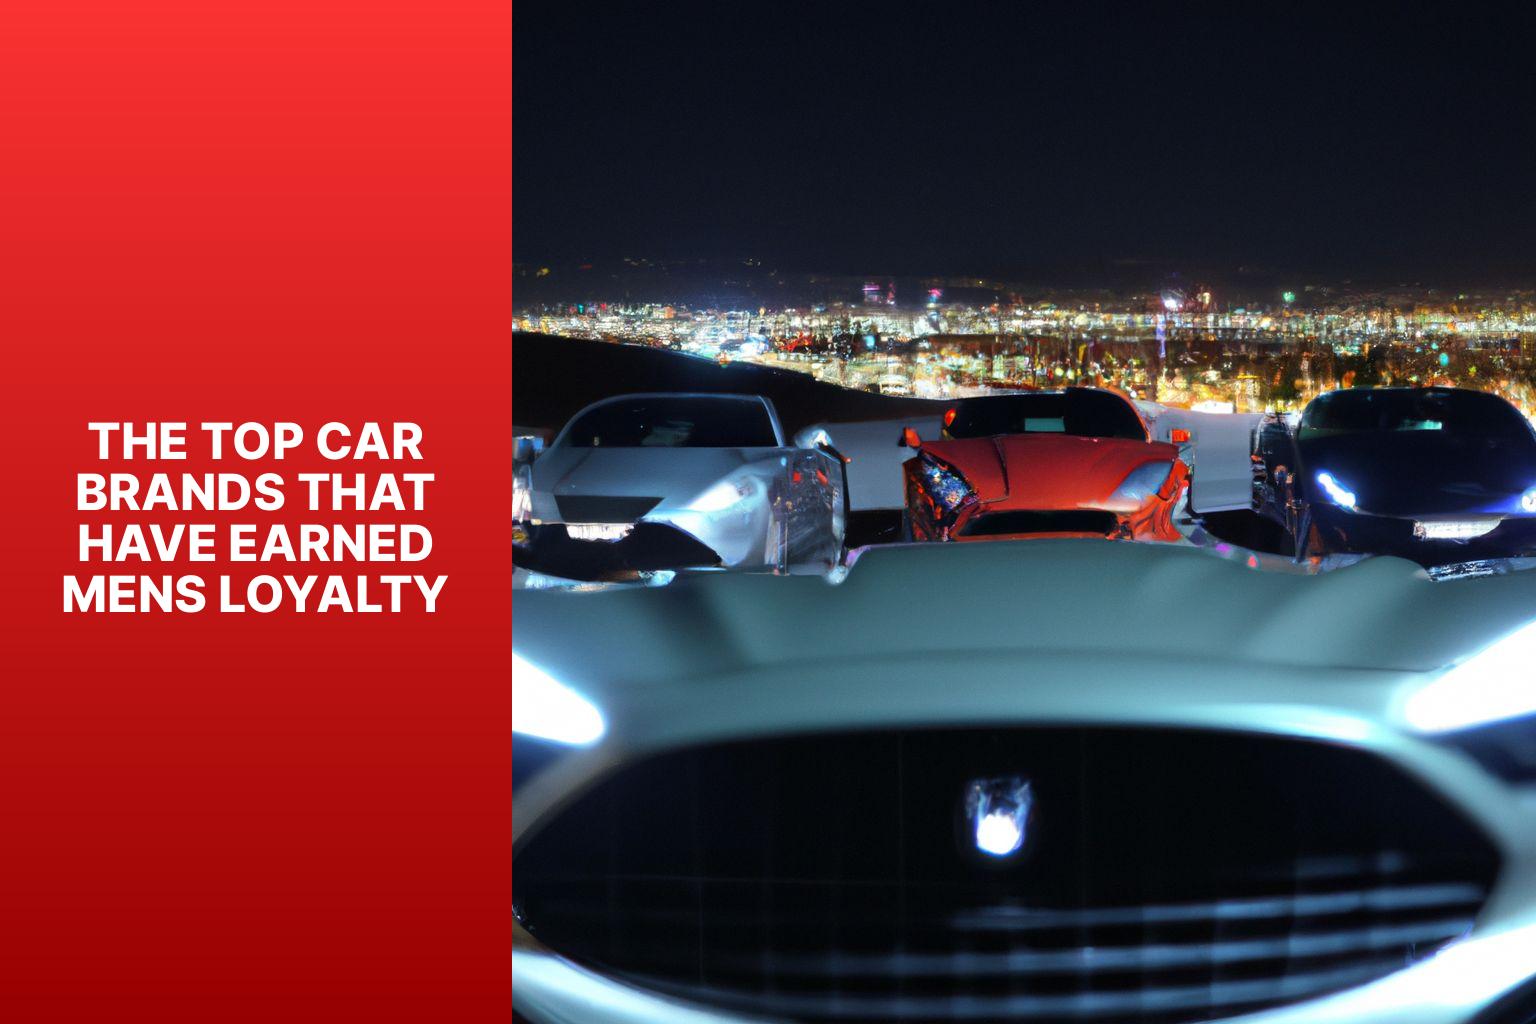 The Top Car Brands that Have Earned Men’s Loyalty